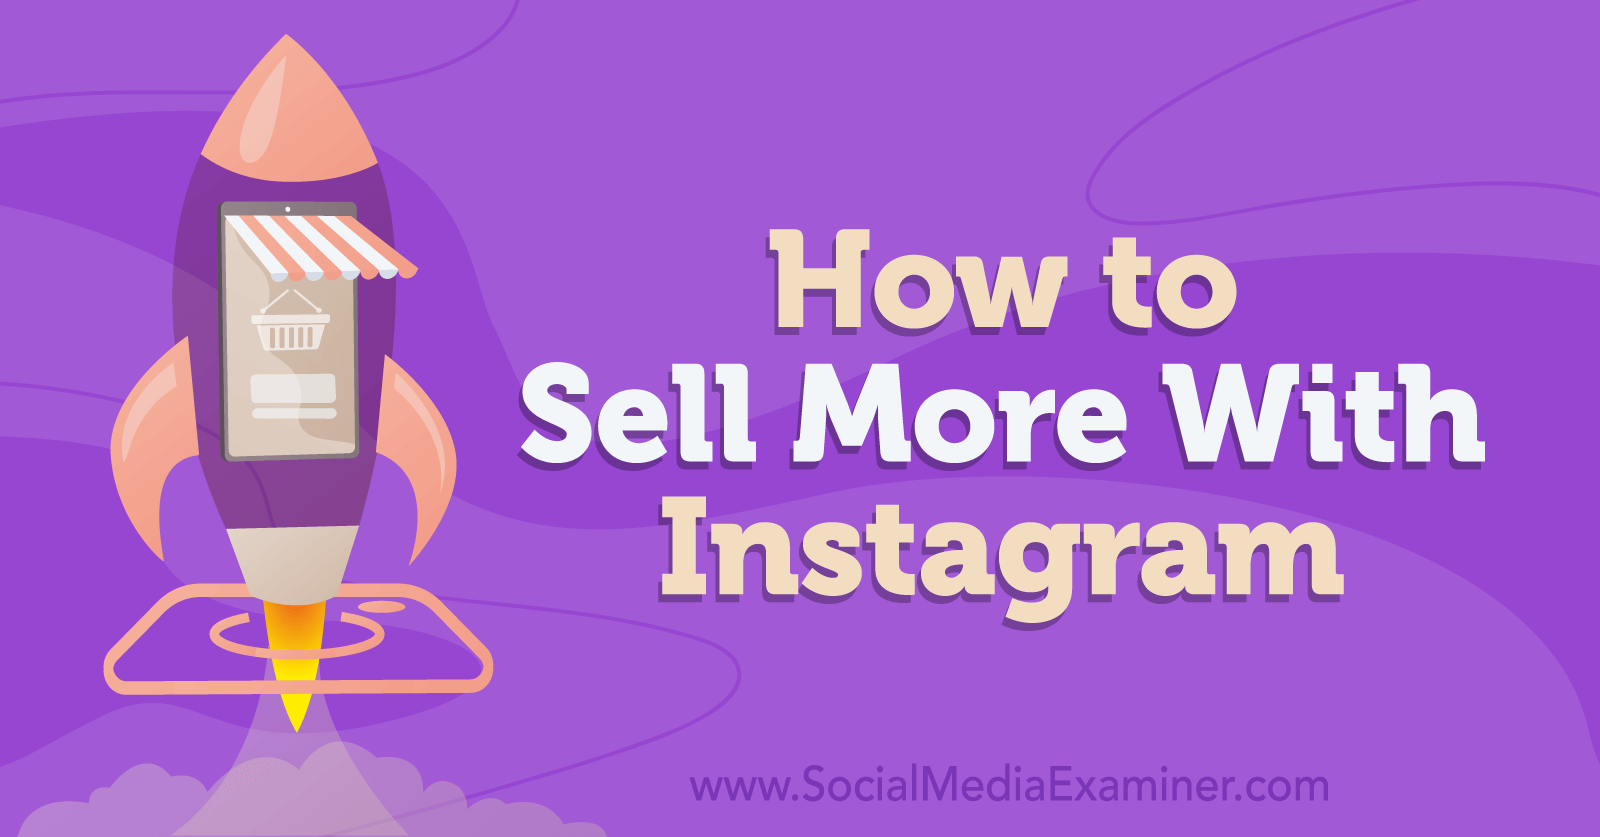 Instagram Accounts for Sale - Buy & Sell